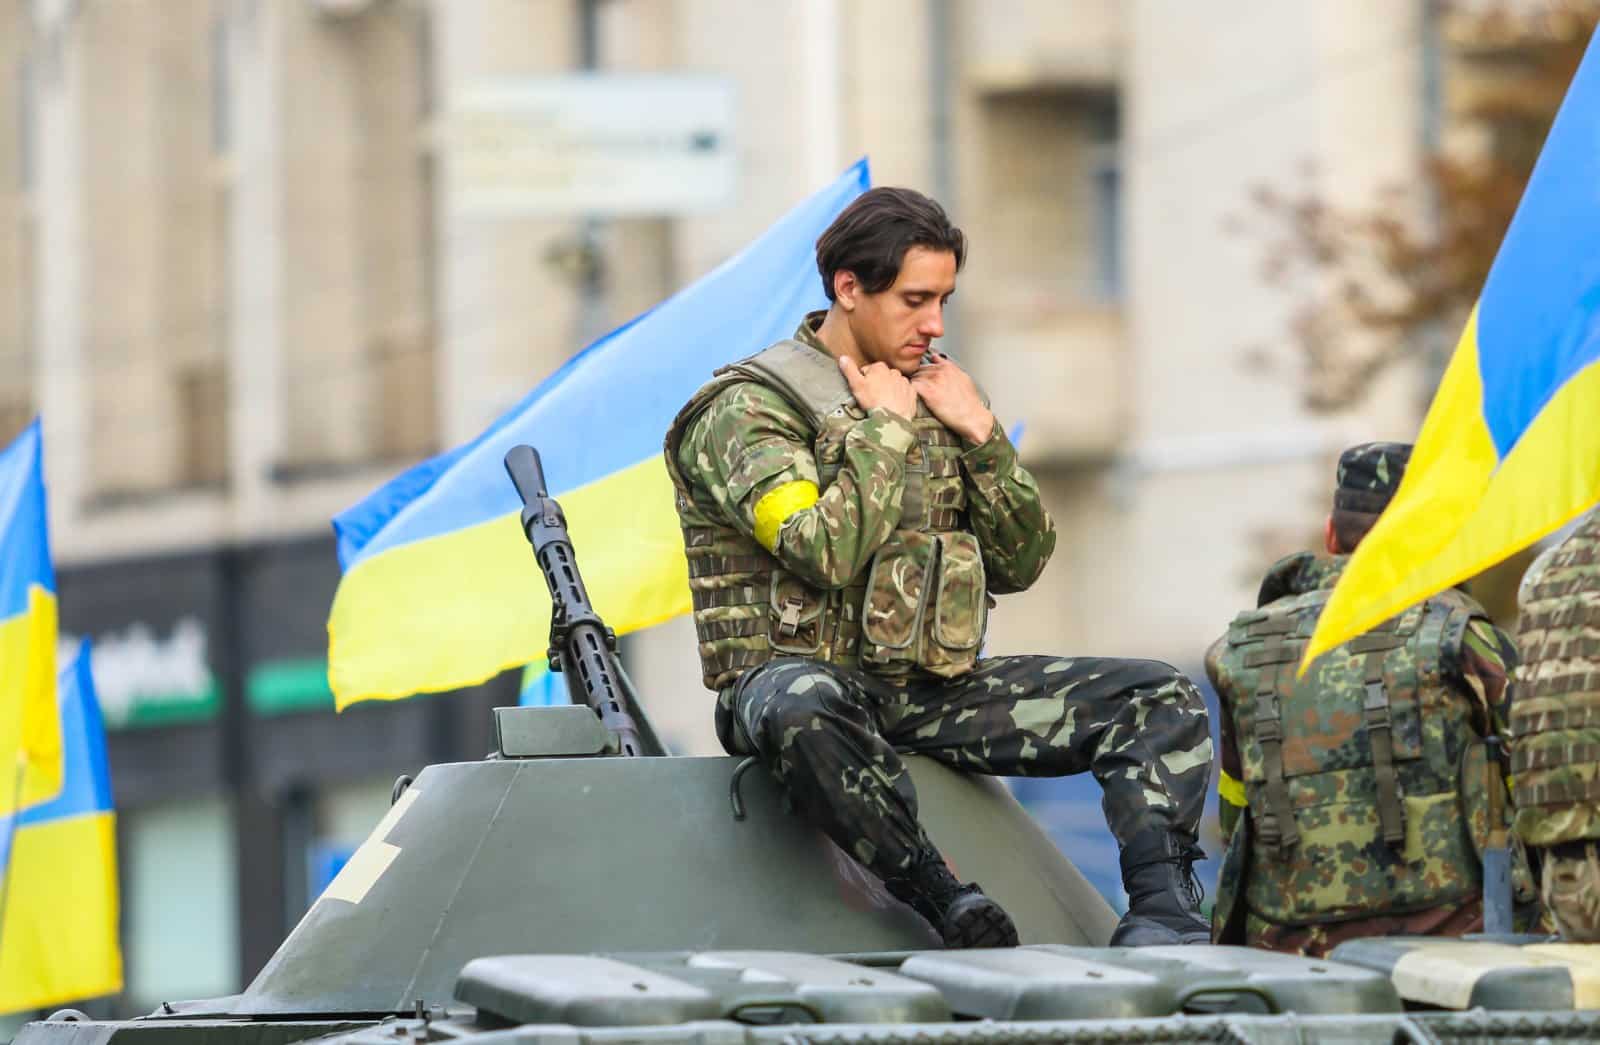 Image Credit: Shutterstock / Oleh Dubyna <p>The ongoing conflict in Ukraine has broader implications for safety in neighboring Eastern European countries. Review the latest geopolitical developments and travel advisories.</p>